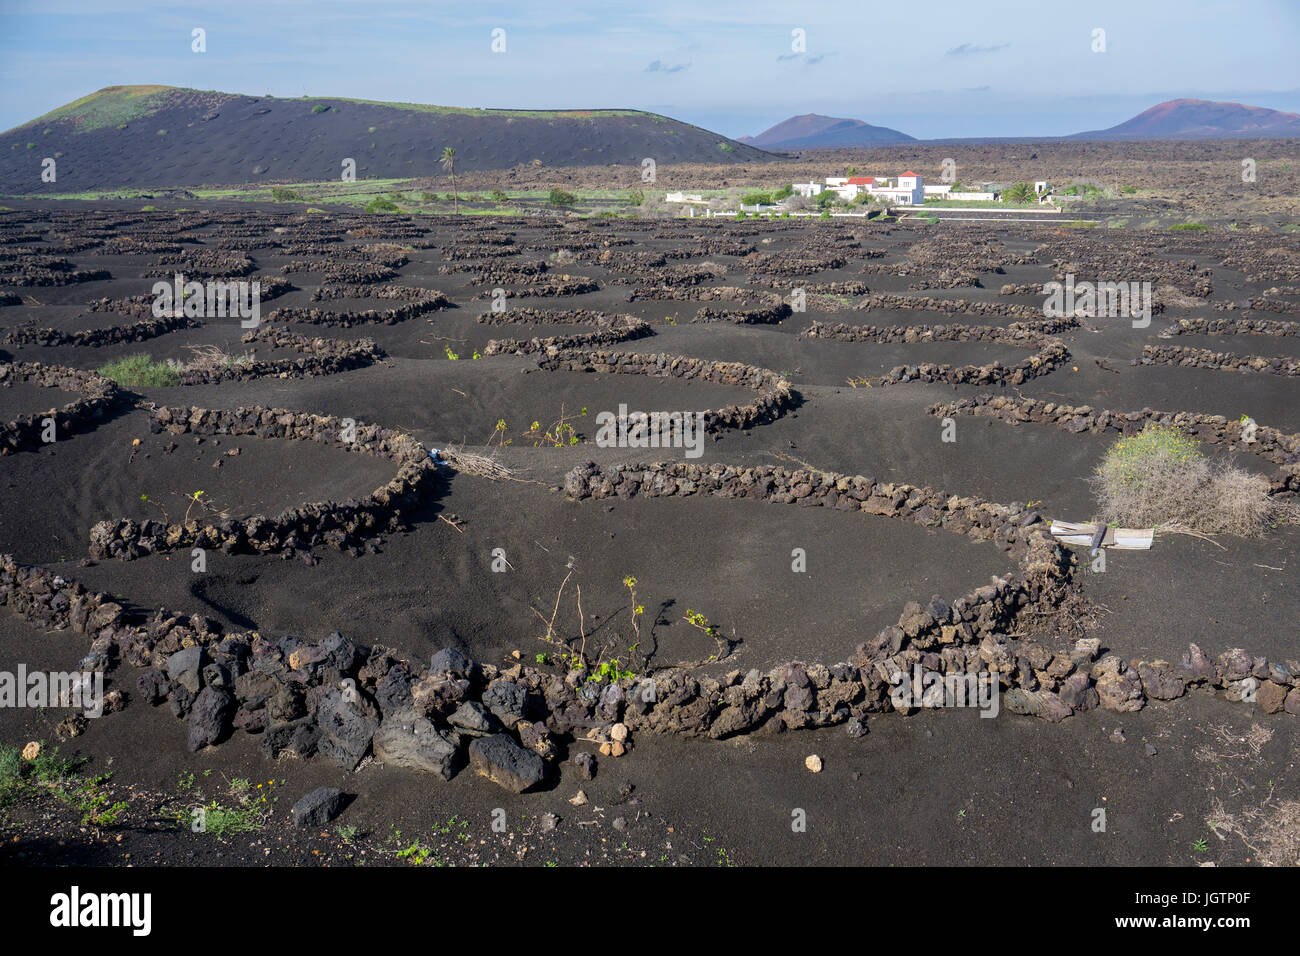 Volcanic wine growing, lava stone murals and hollows protecting vines, vineyard at La Geria, Lanzarote island, Canary islands, Spain, Europe Stock Photo